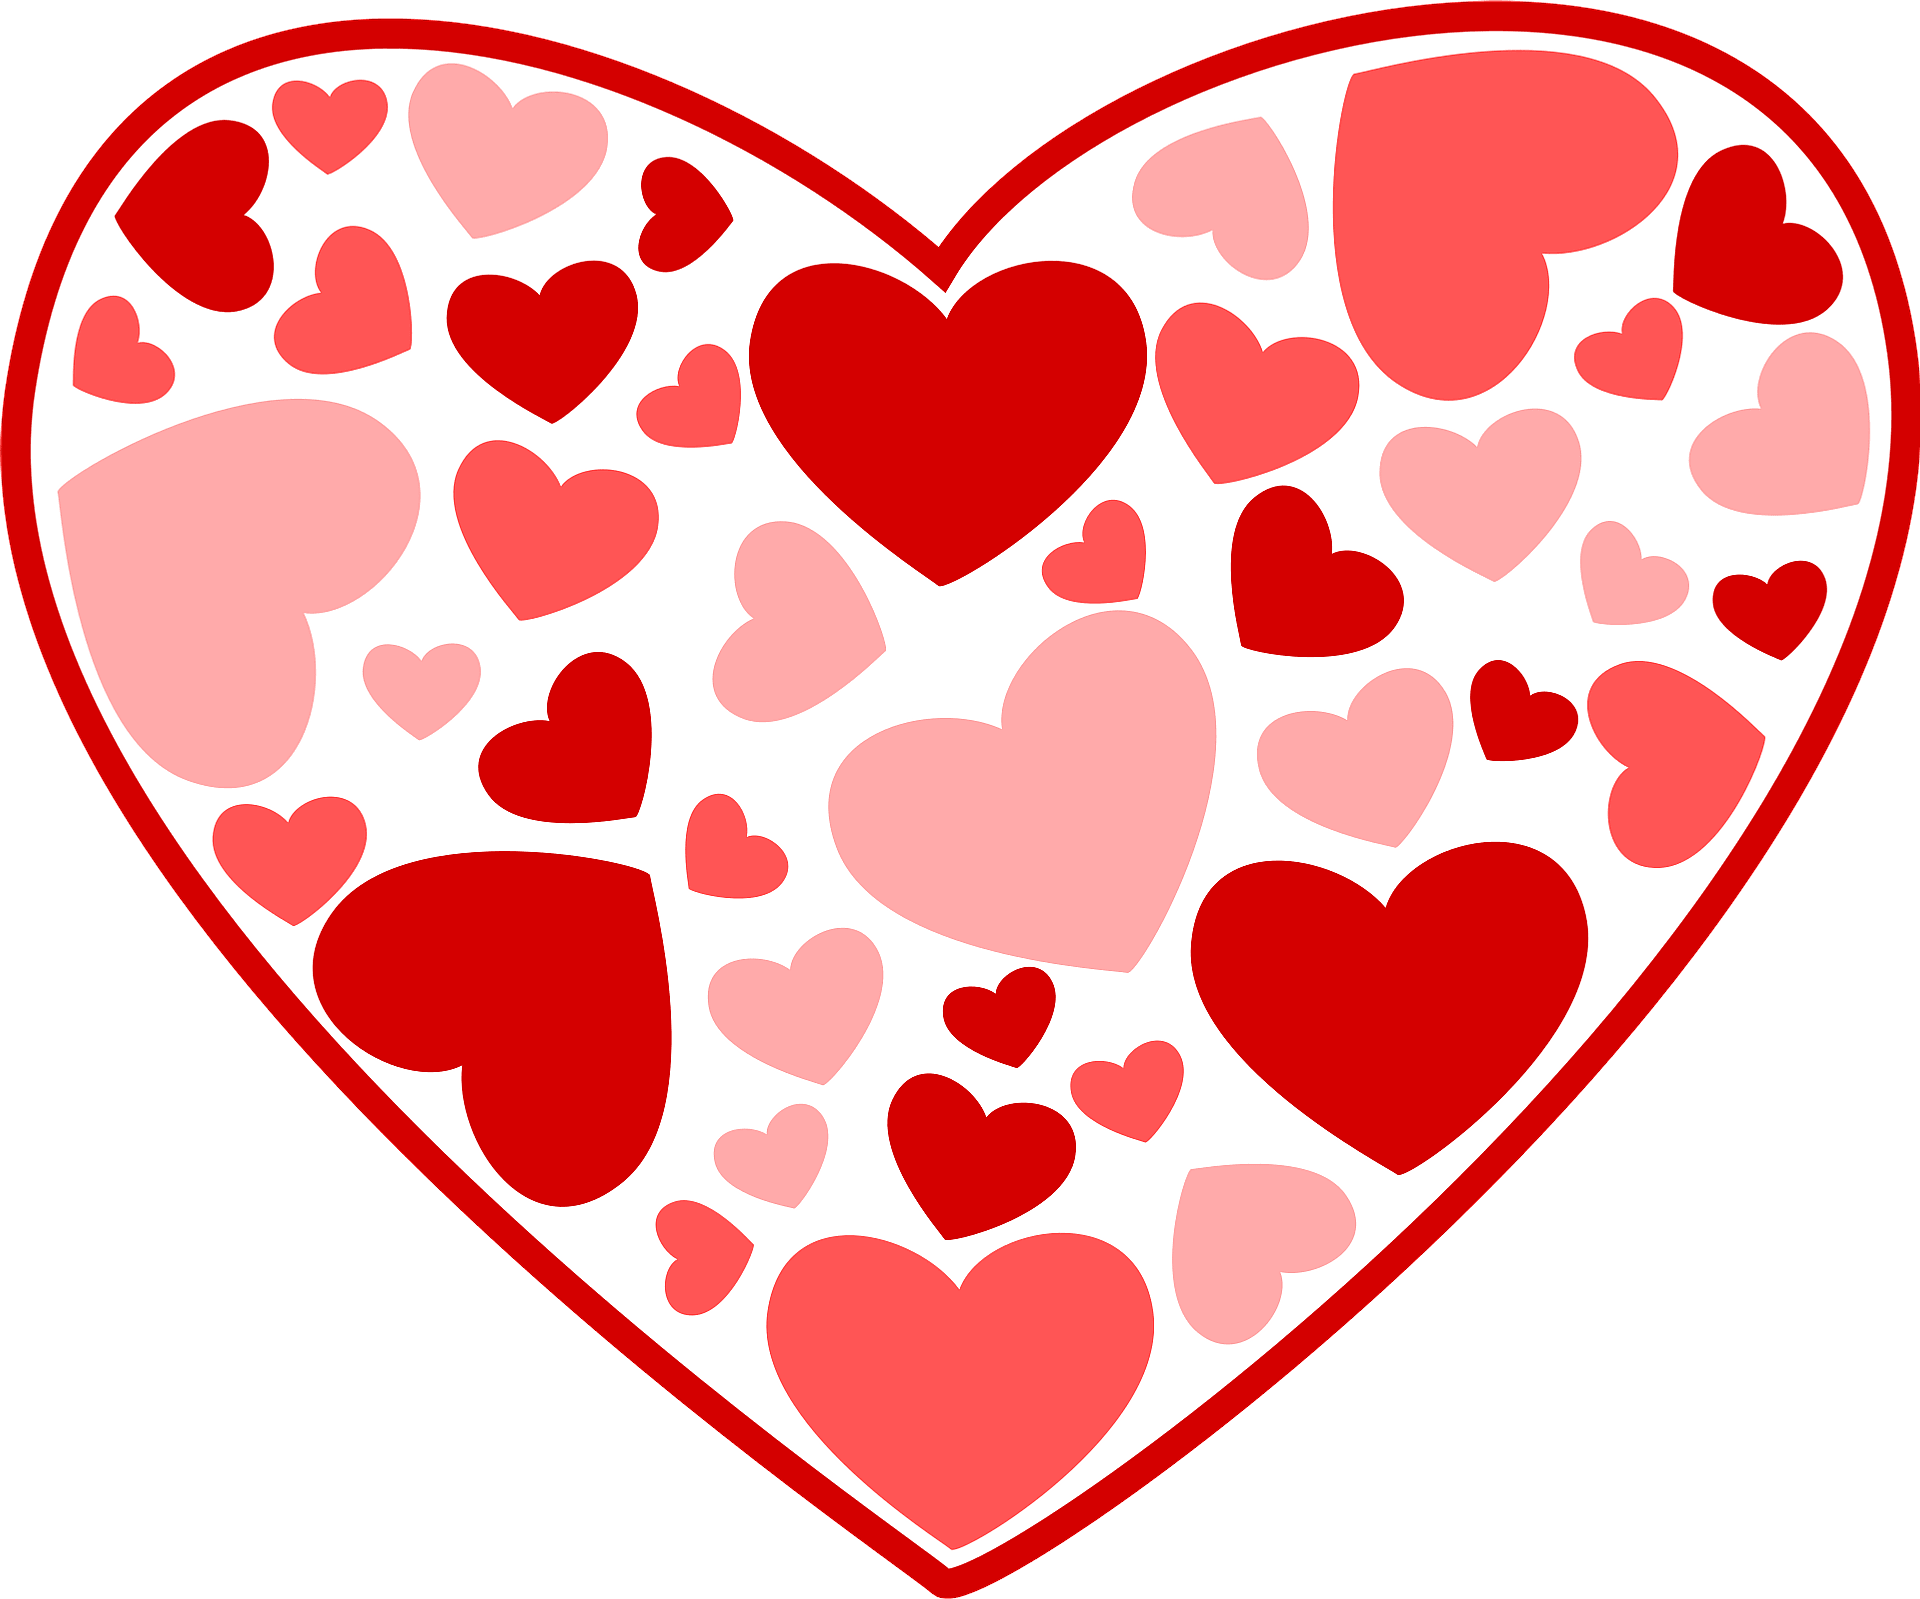 heart-of-hearts-clipart-xl.png